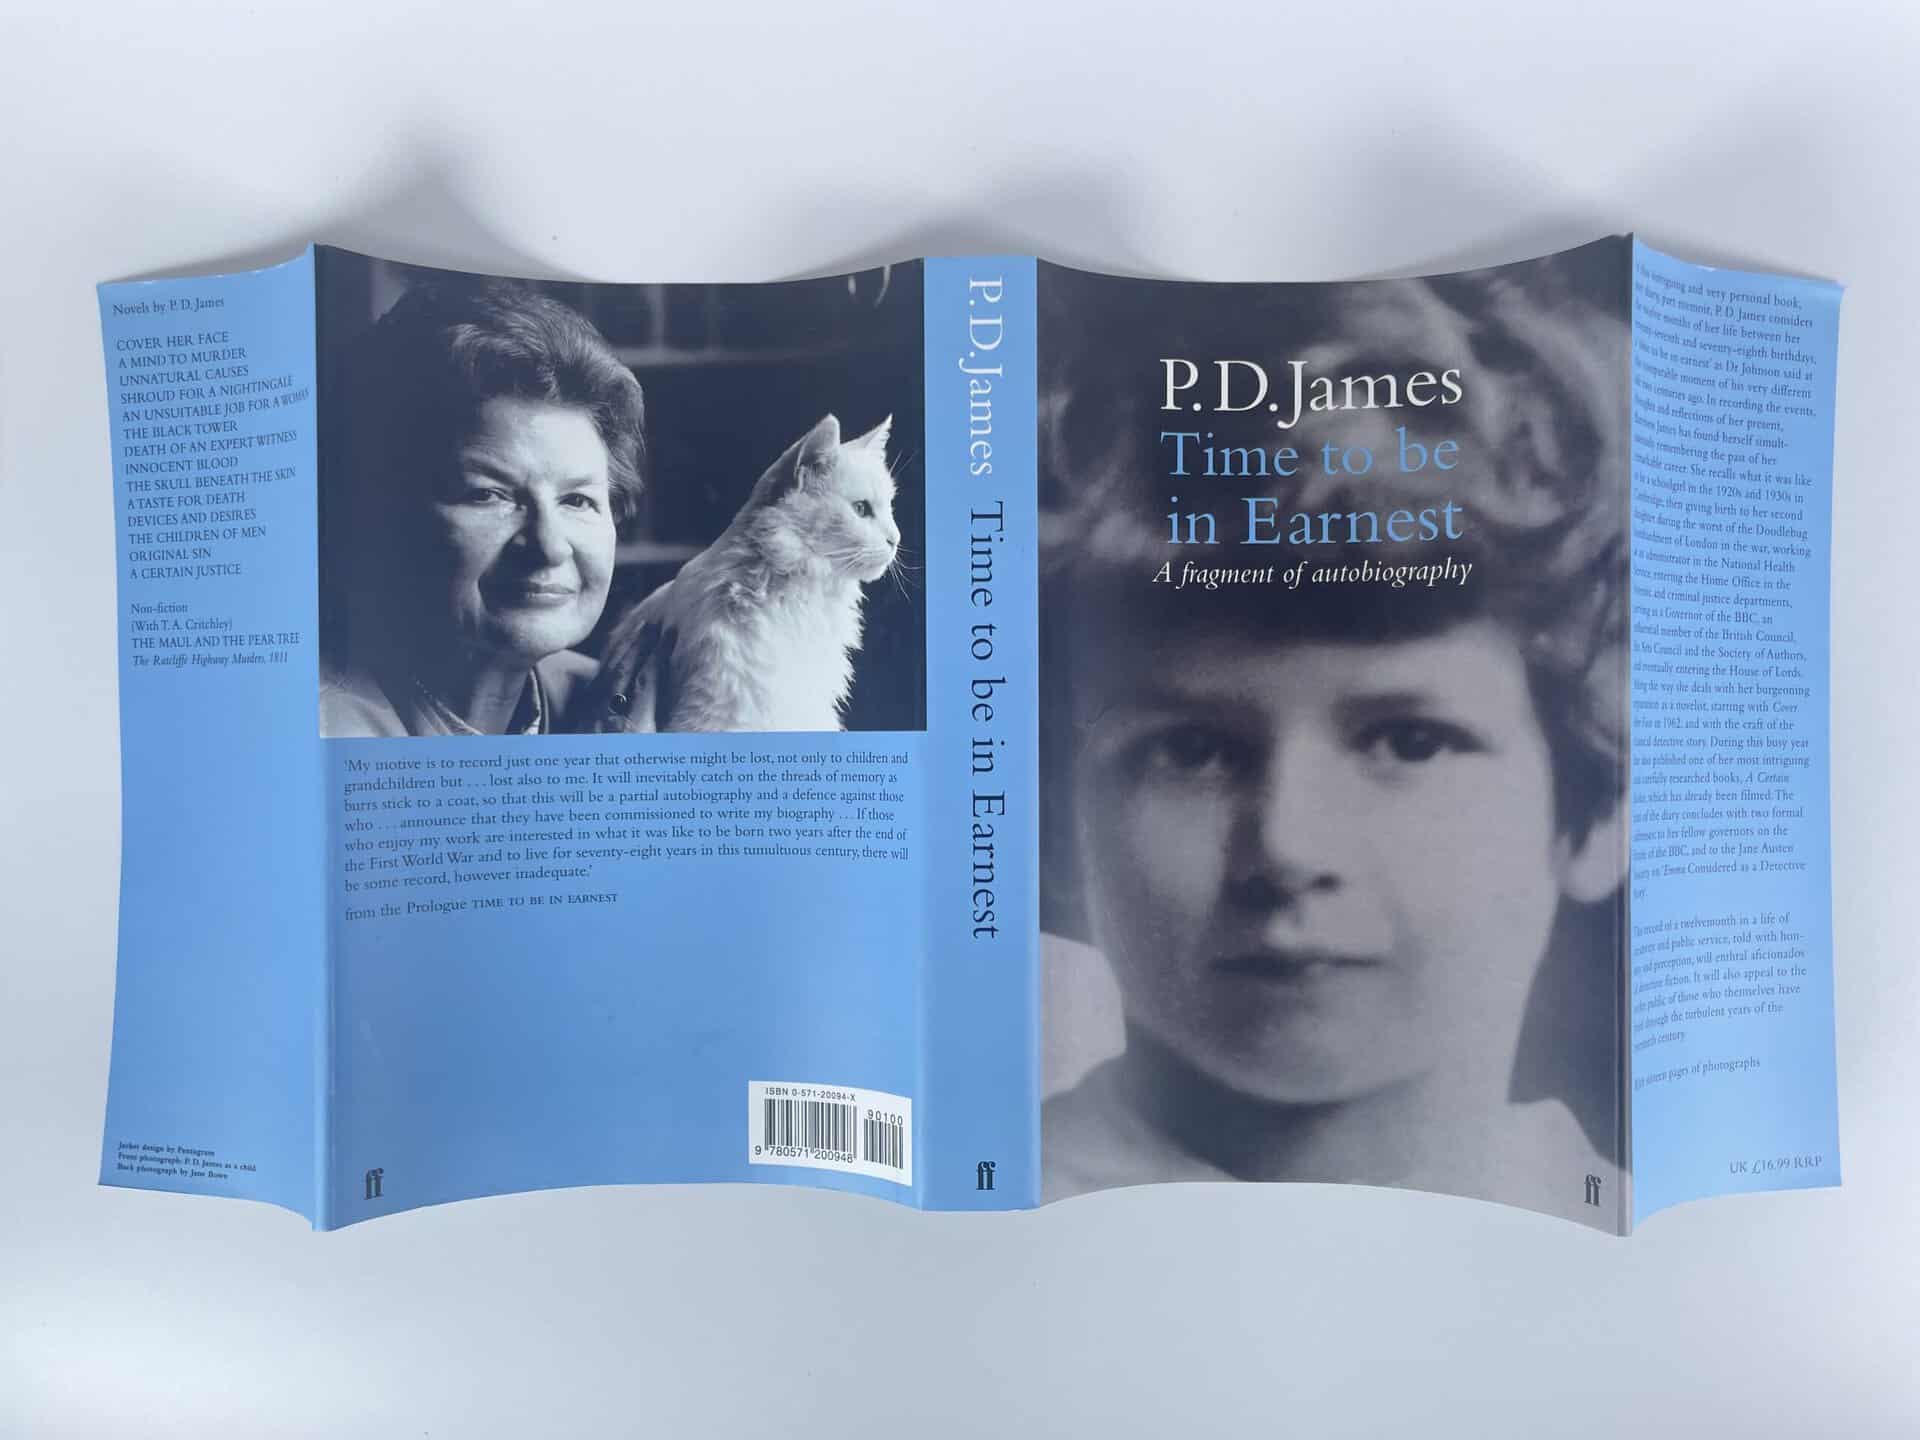 pd james time to be earnest signed first ed6